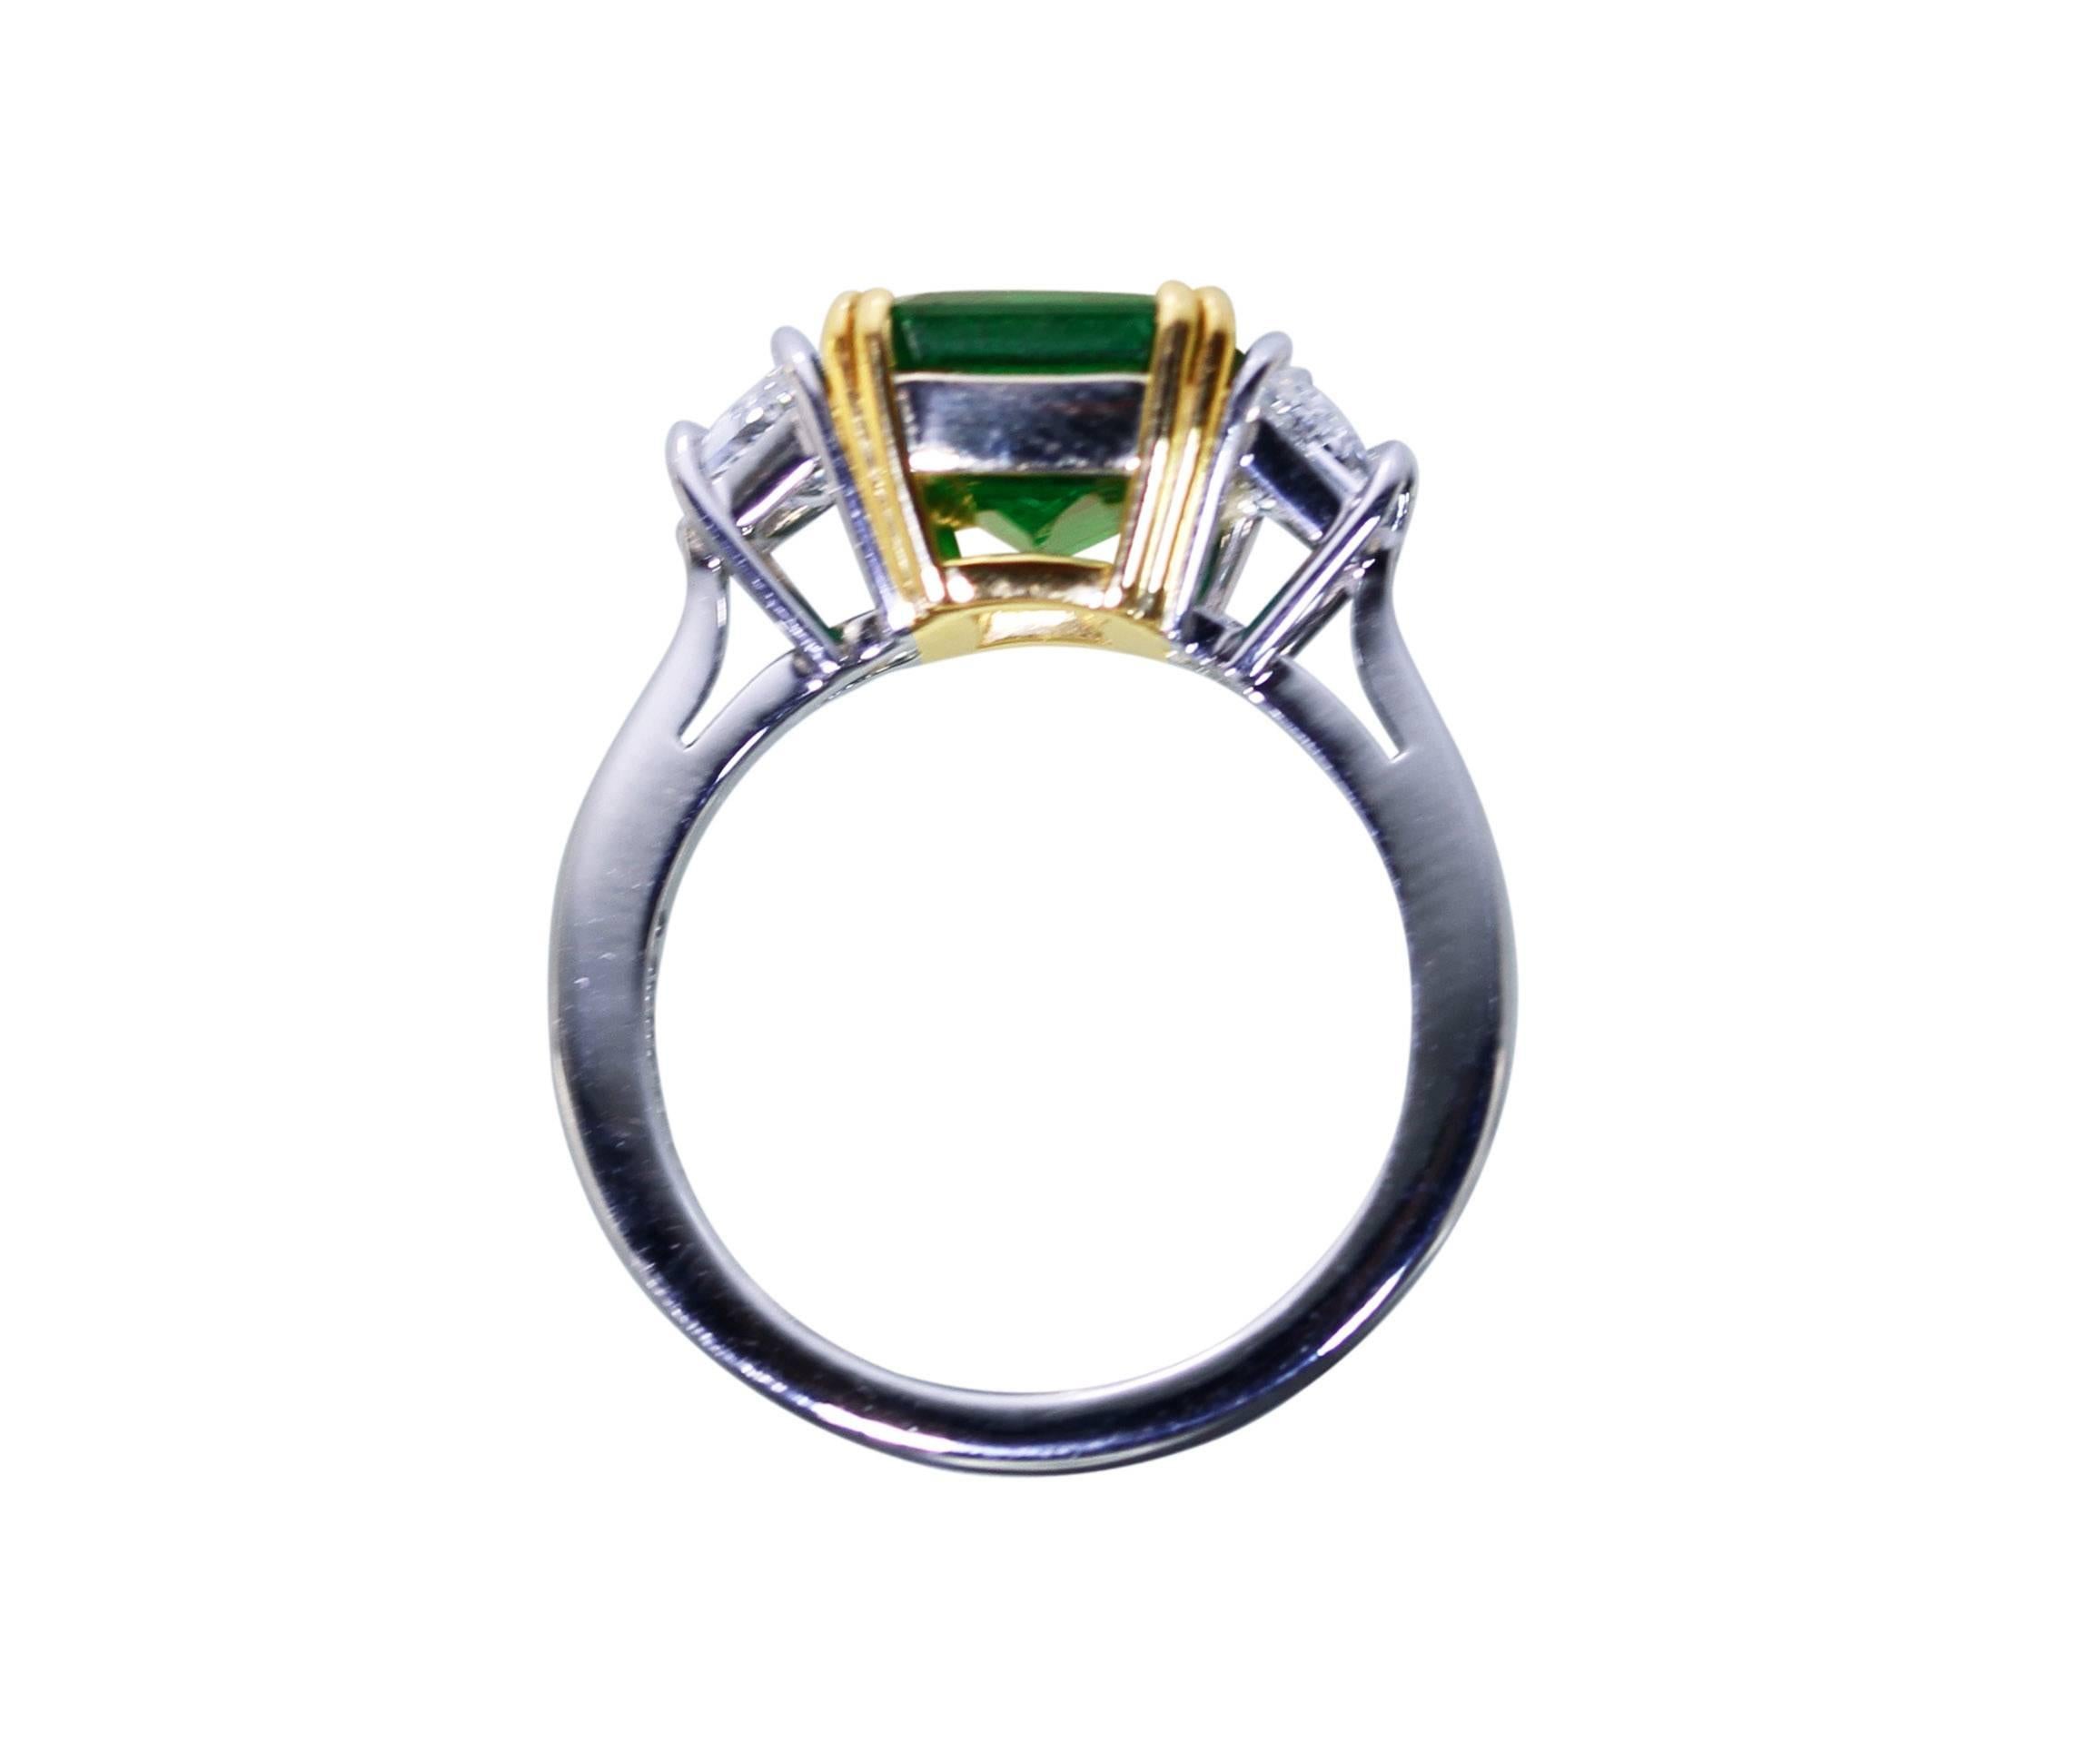 Women's 3.33 Carat Colombian Emerald and Diamond Ring by A. Aletto